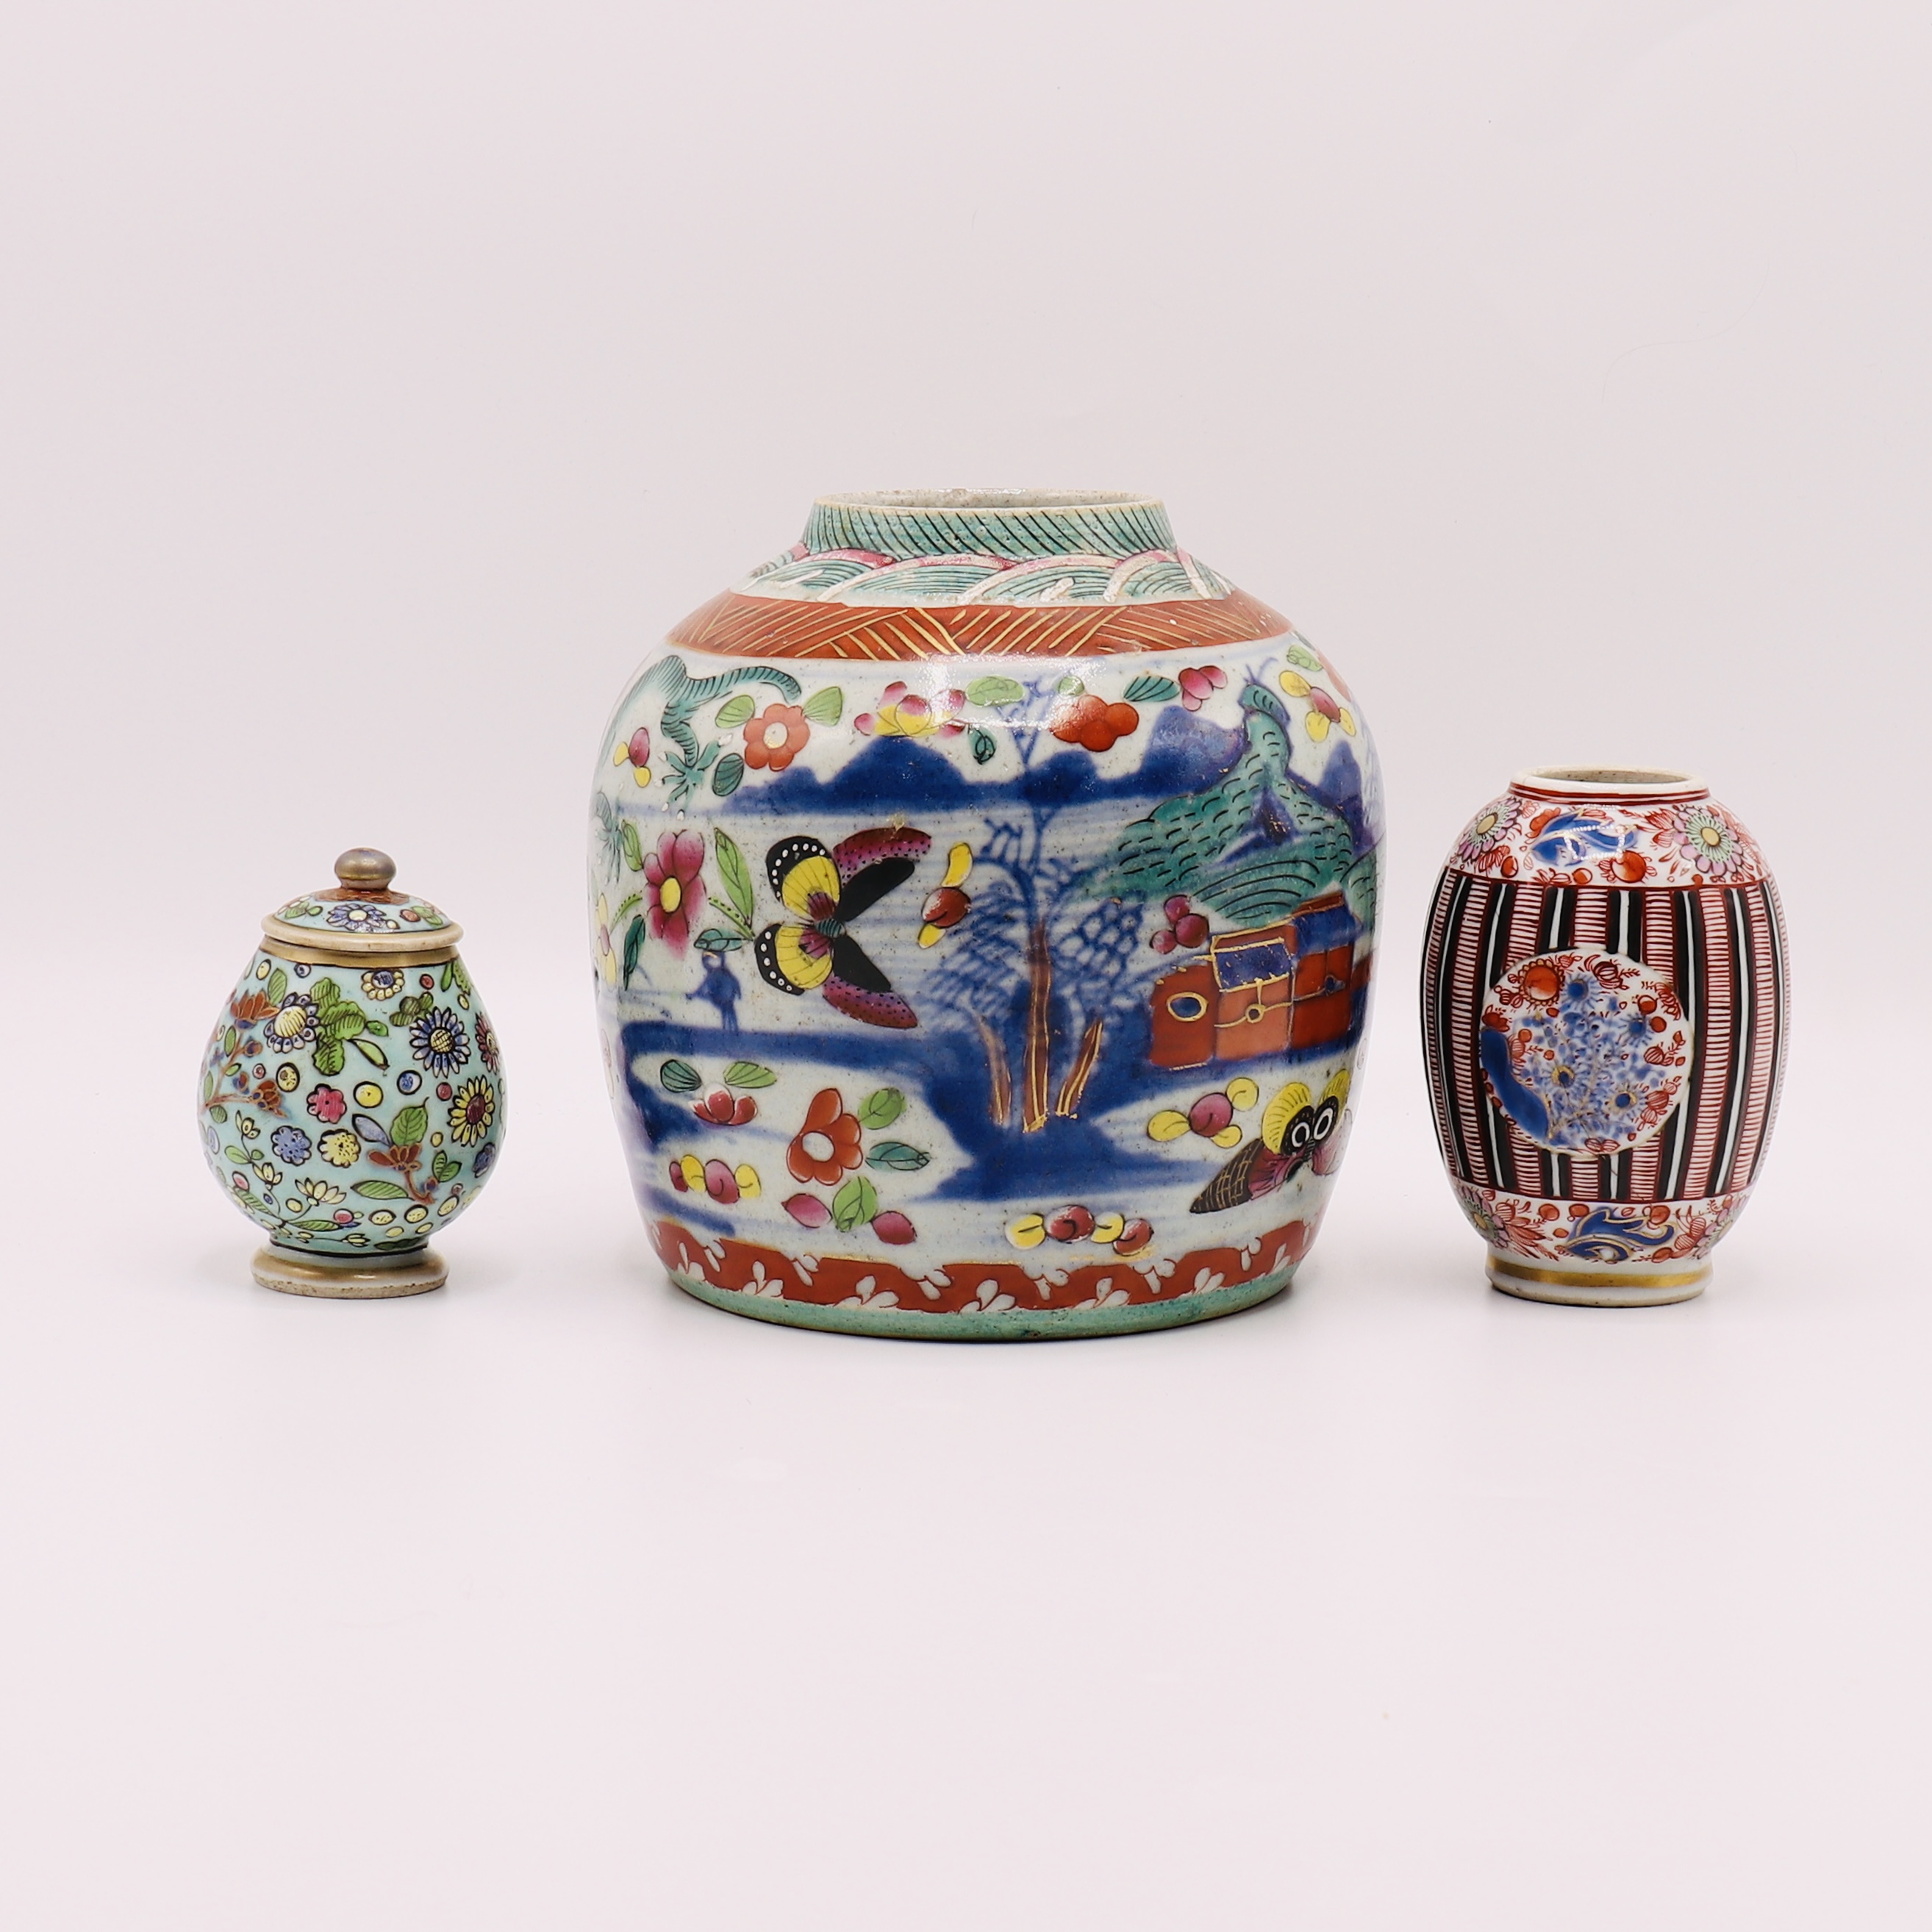 THREE CHINESE FAMILLE ROSE JARS, QING DYNASTY (1644-1911) - Image 2 of 5